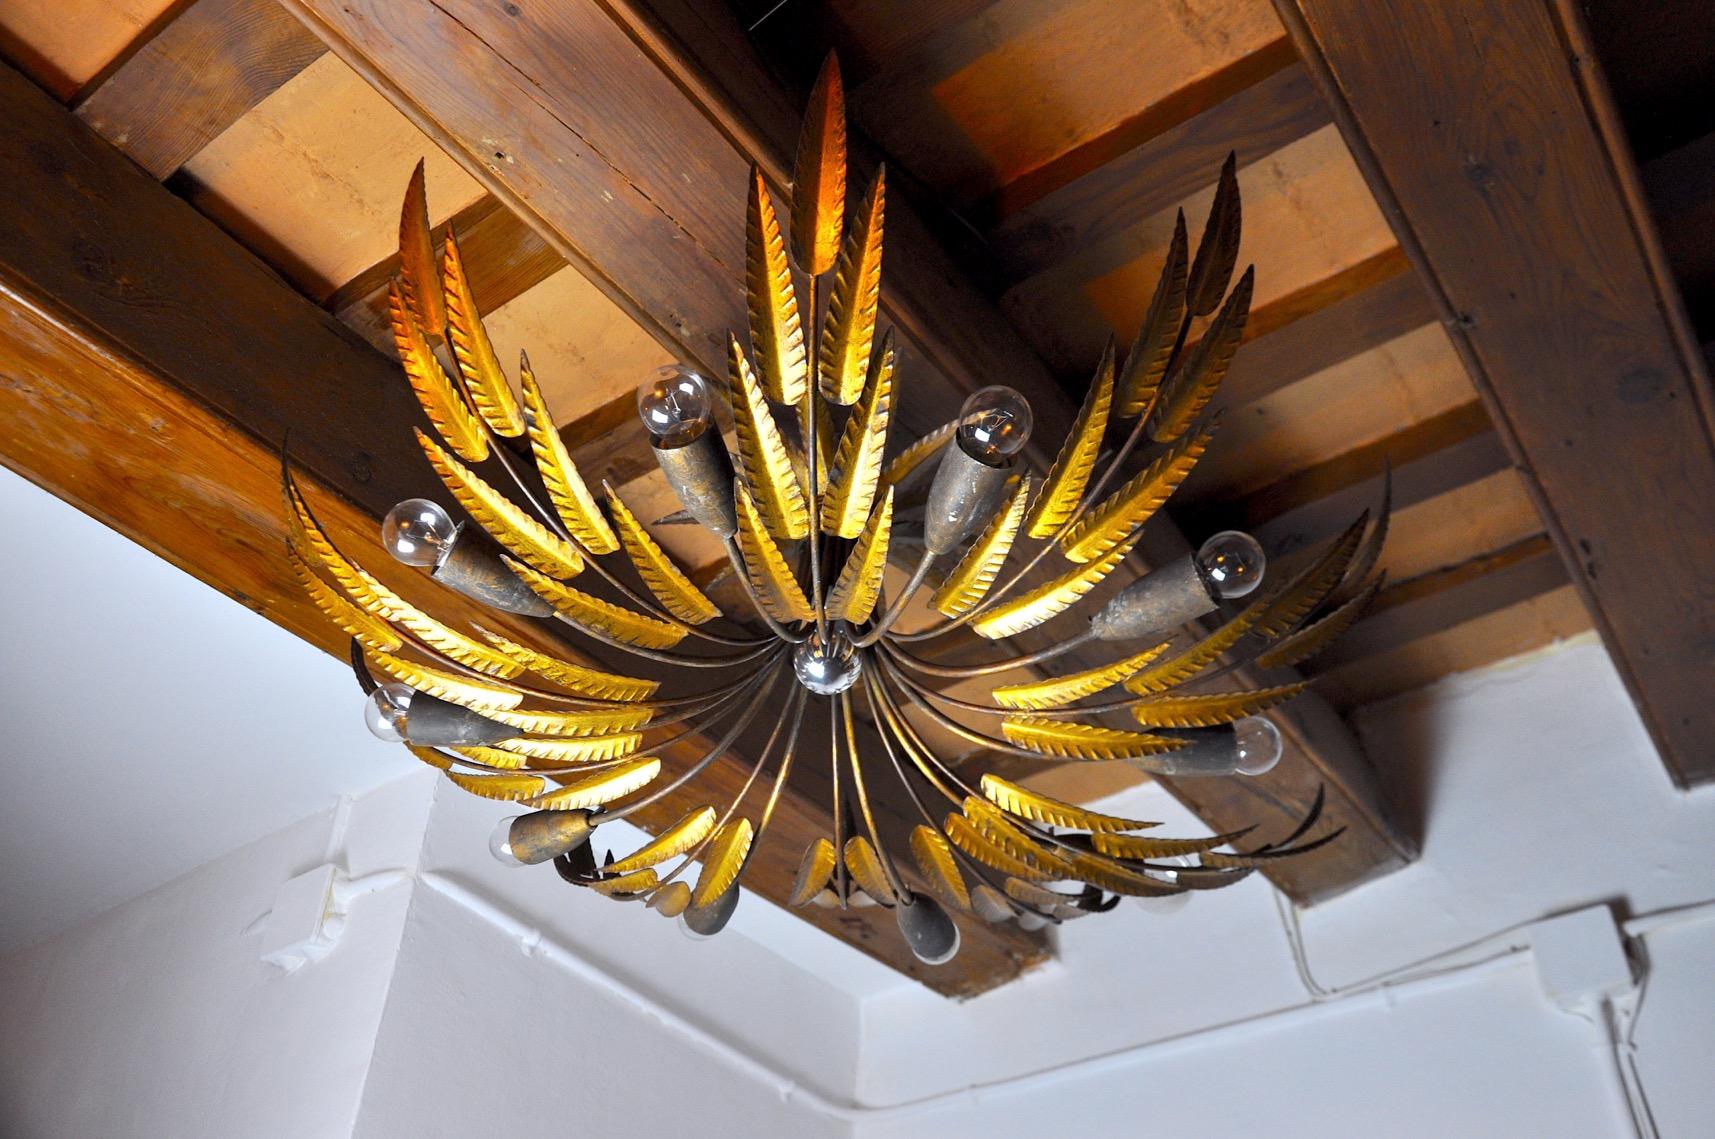 Rare and very large ferroarte chandelier designed and produced in Spain in the 1960s. Sun-shaped structure representing leaves. Unique wrought iron work finished with gold leaf. The ceiling light is made up of 11 lights. Rare design object that will